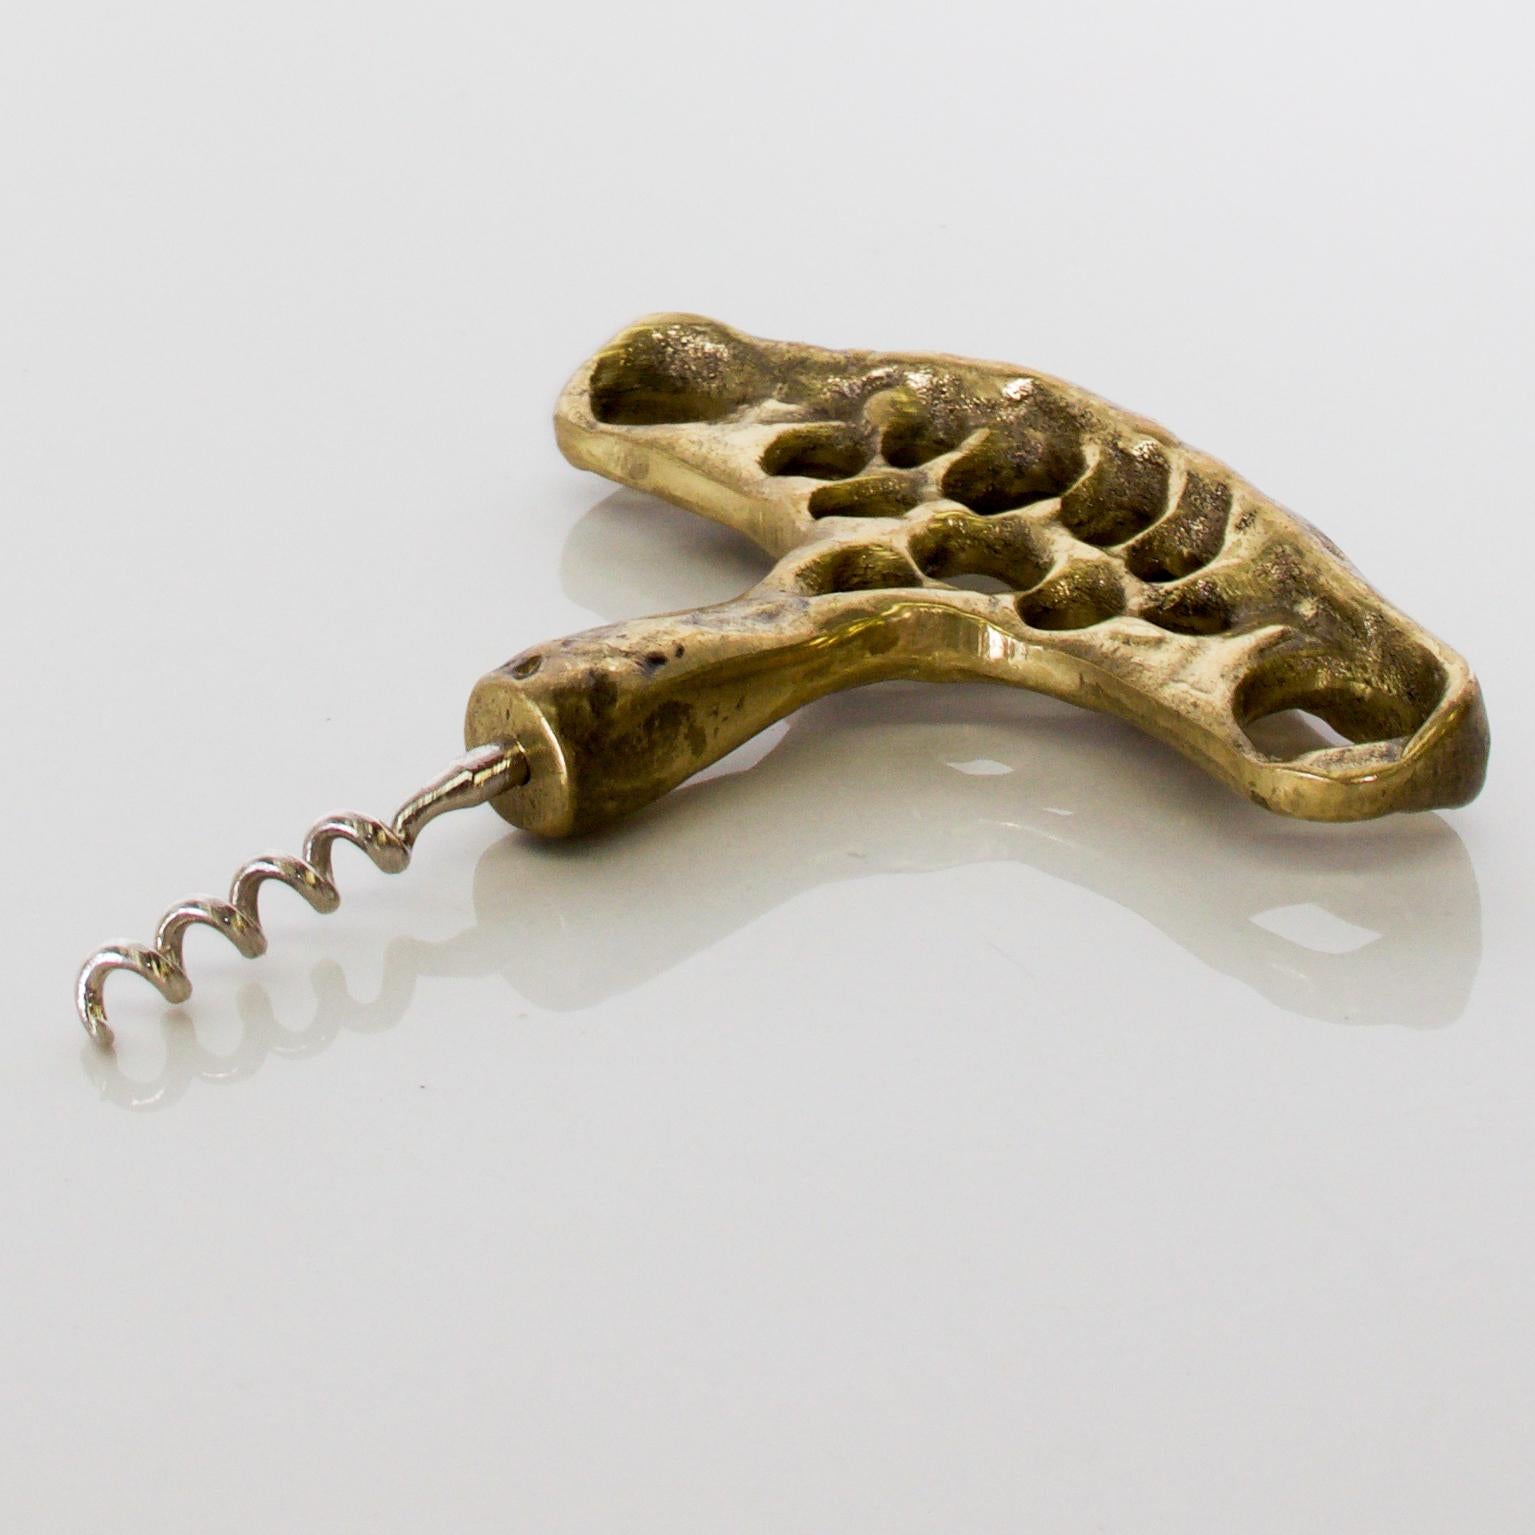 For your consideration: Brutalist bottle cork opener barware Paul Evans Appeal, 1970s, USA.

A Brutalist wine opener heavy solid brass corkscrew with handsomely aged warm golden patina.

Dimensions: 4 3/4